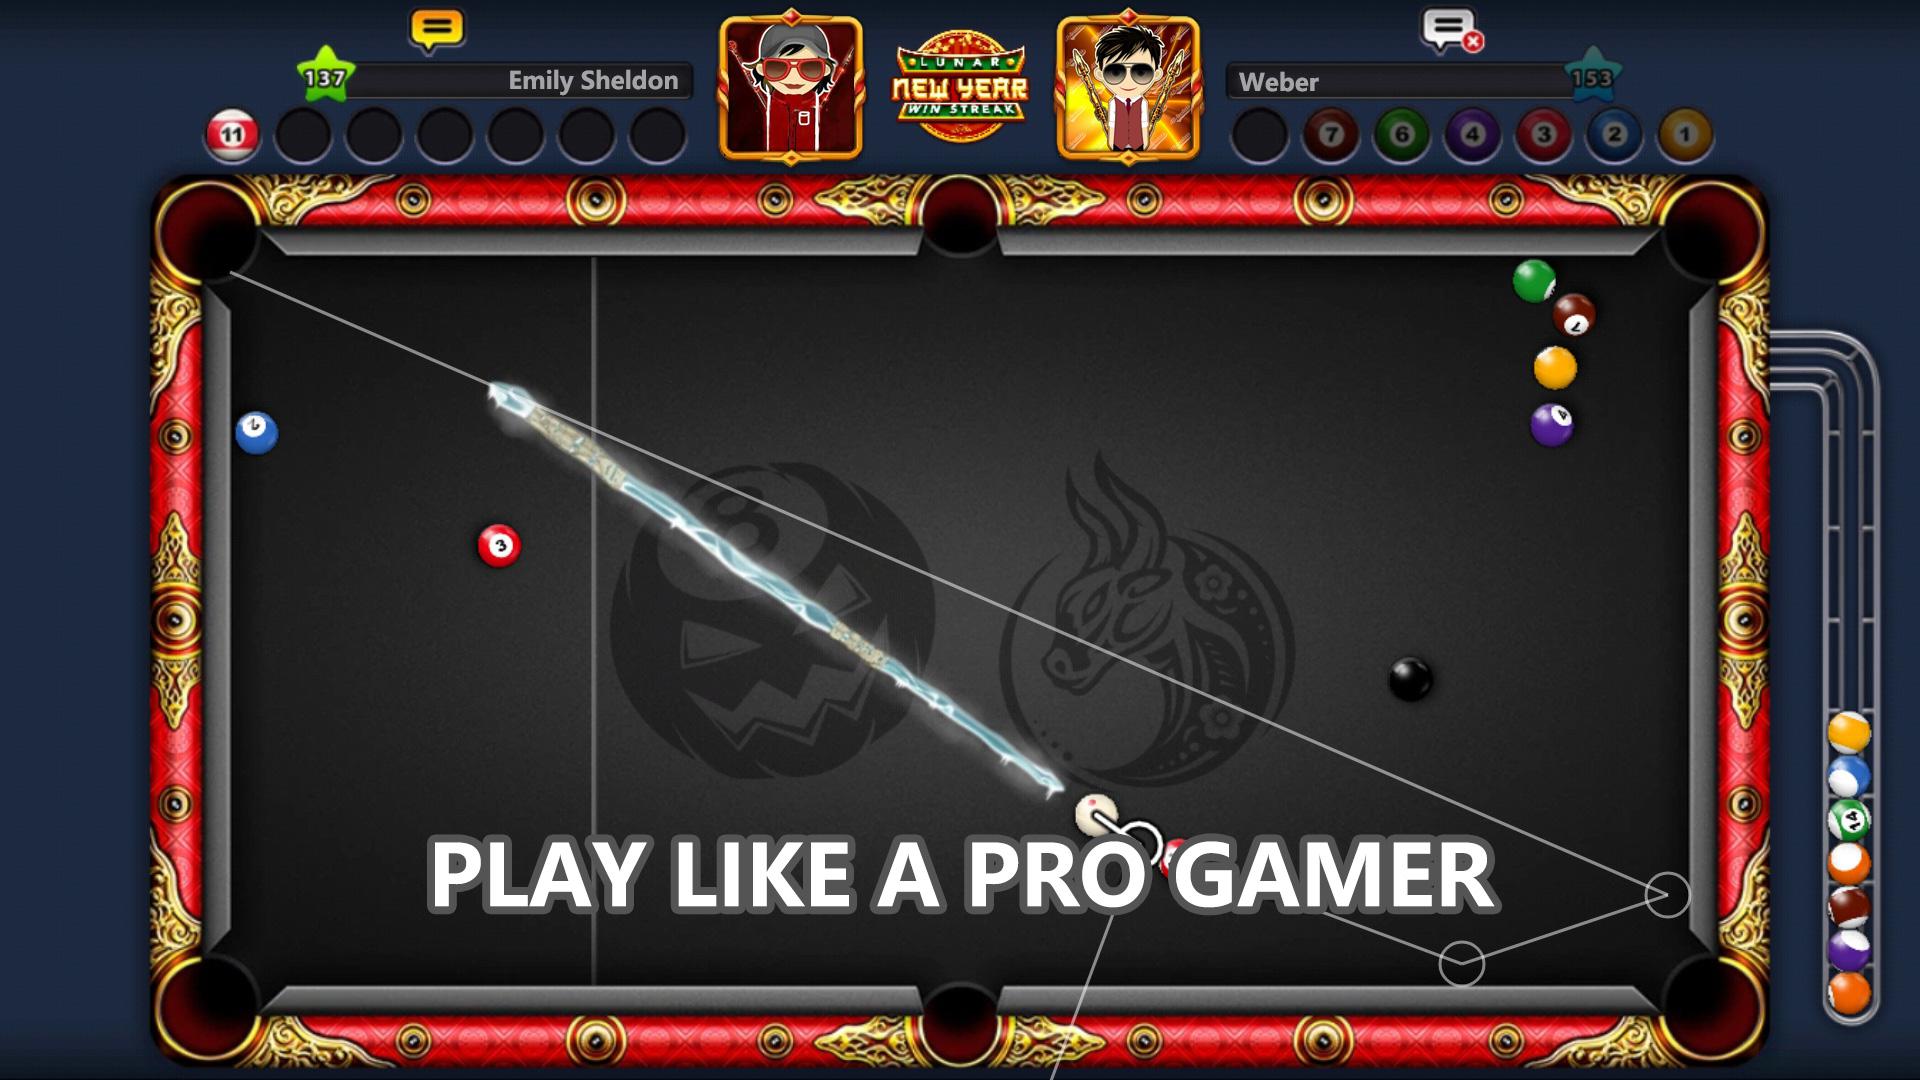 Aim 8 Ball Pro Guide Tool 2023 for Android - App Download